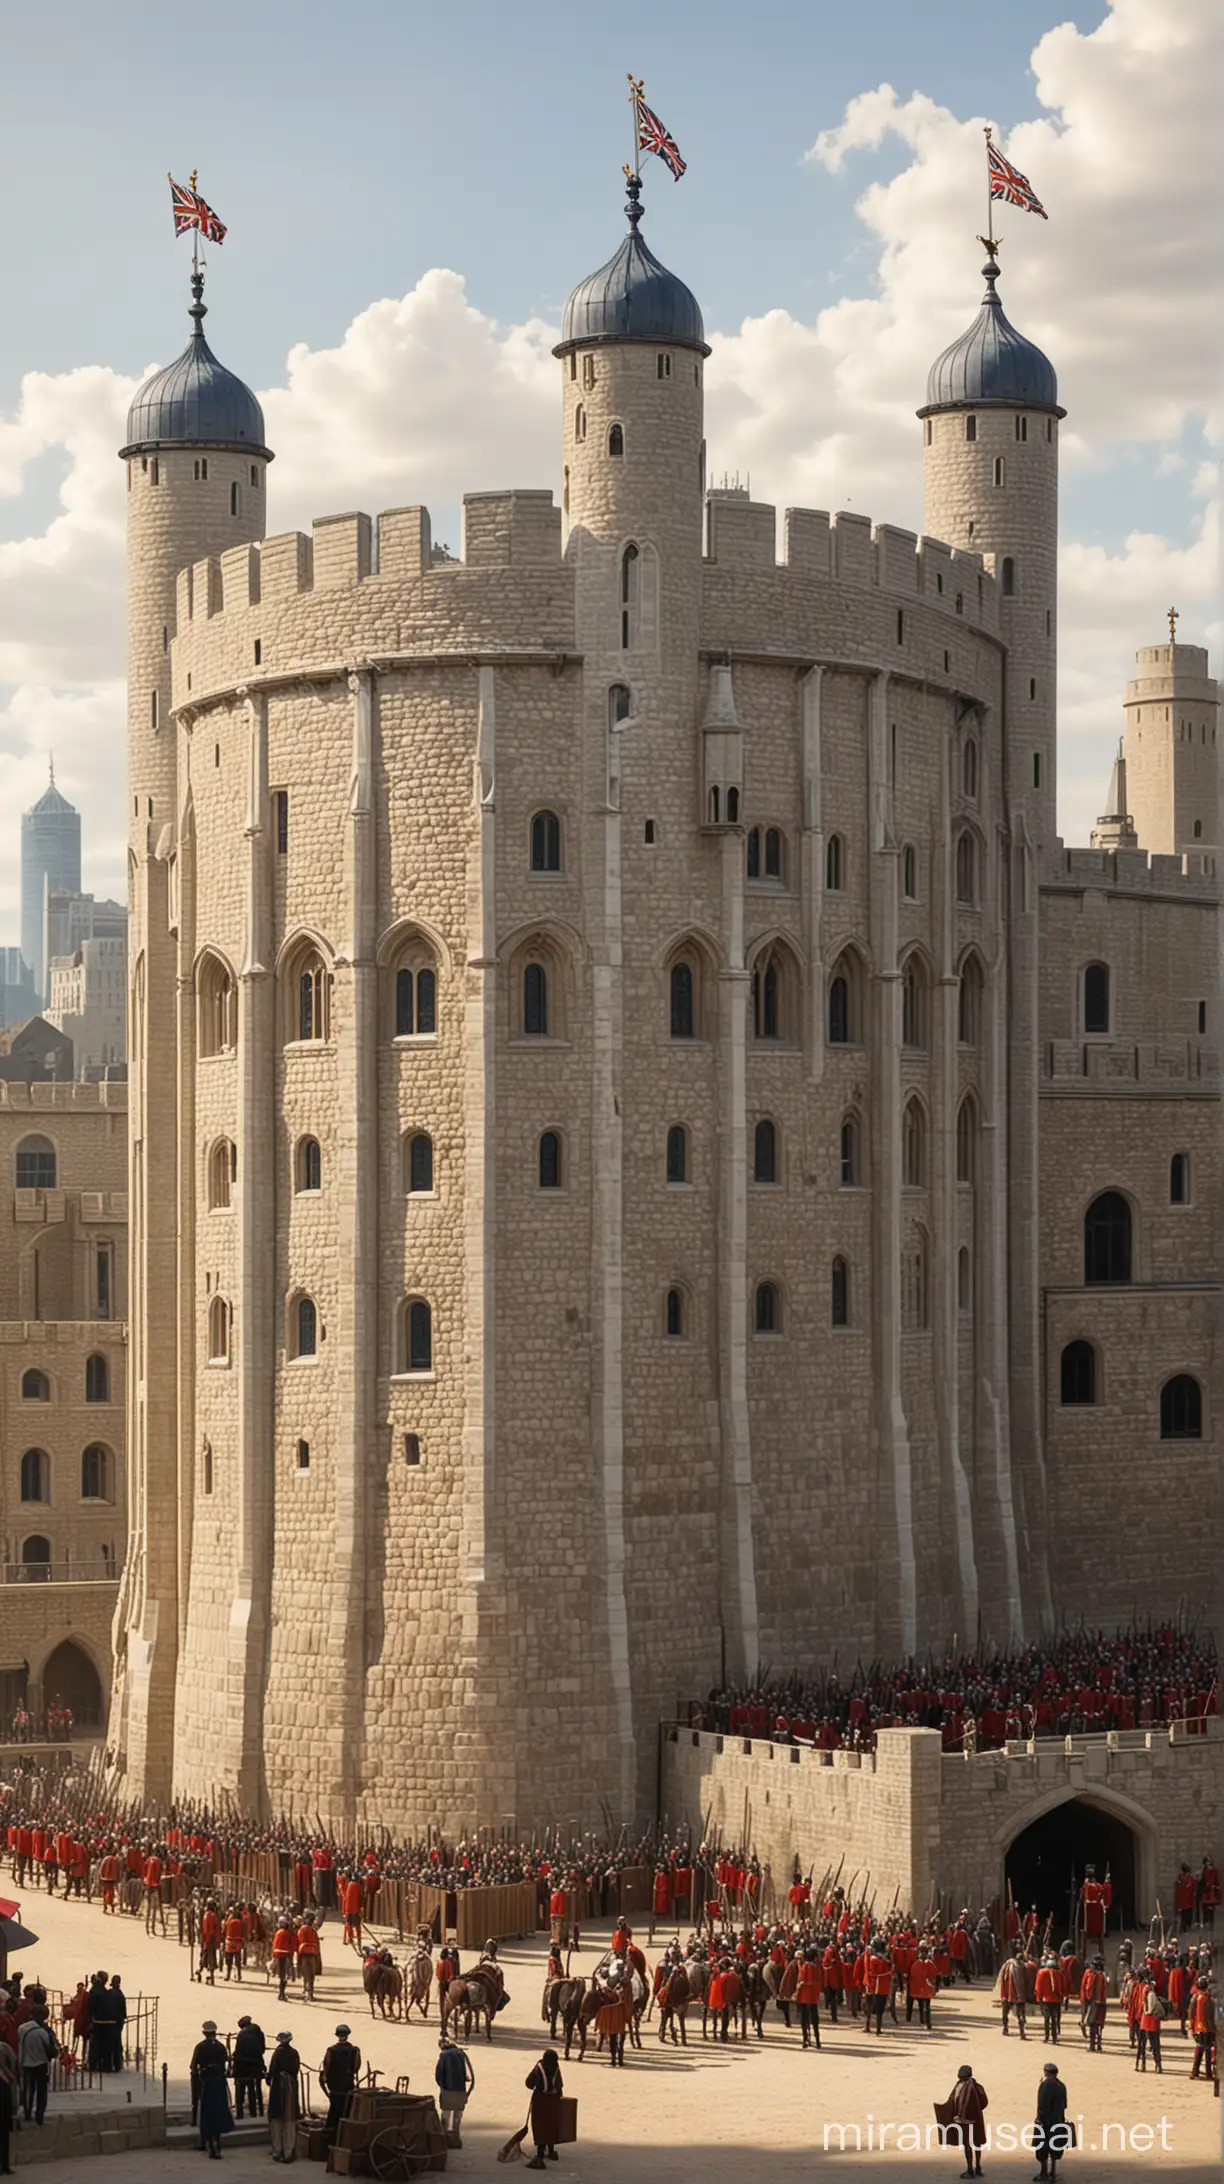 Building of the Tower of London (1078